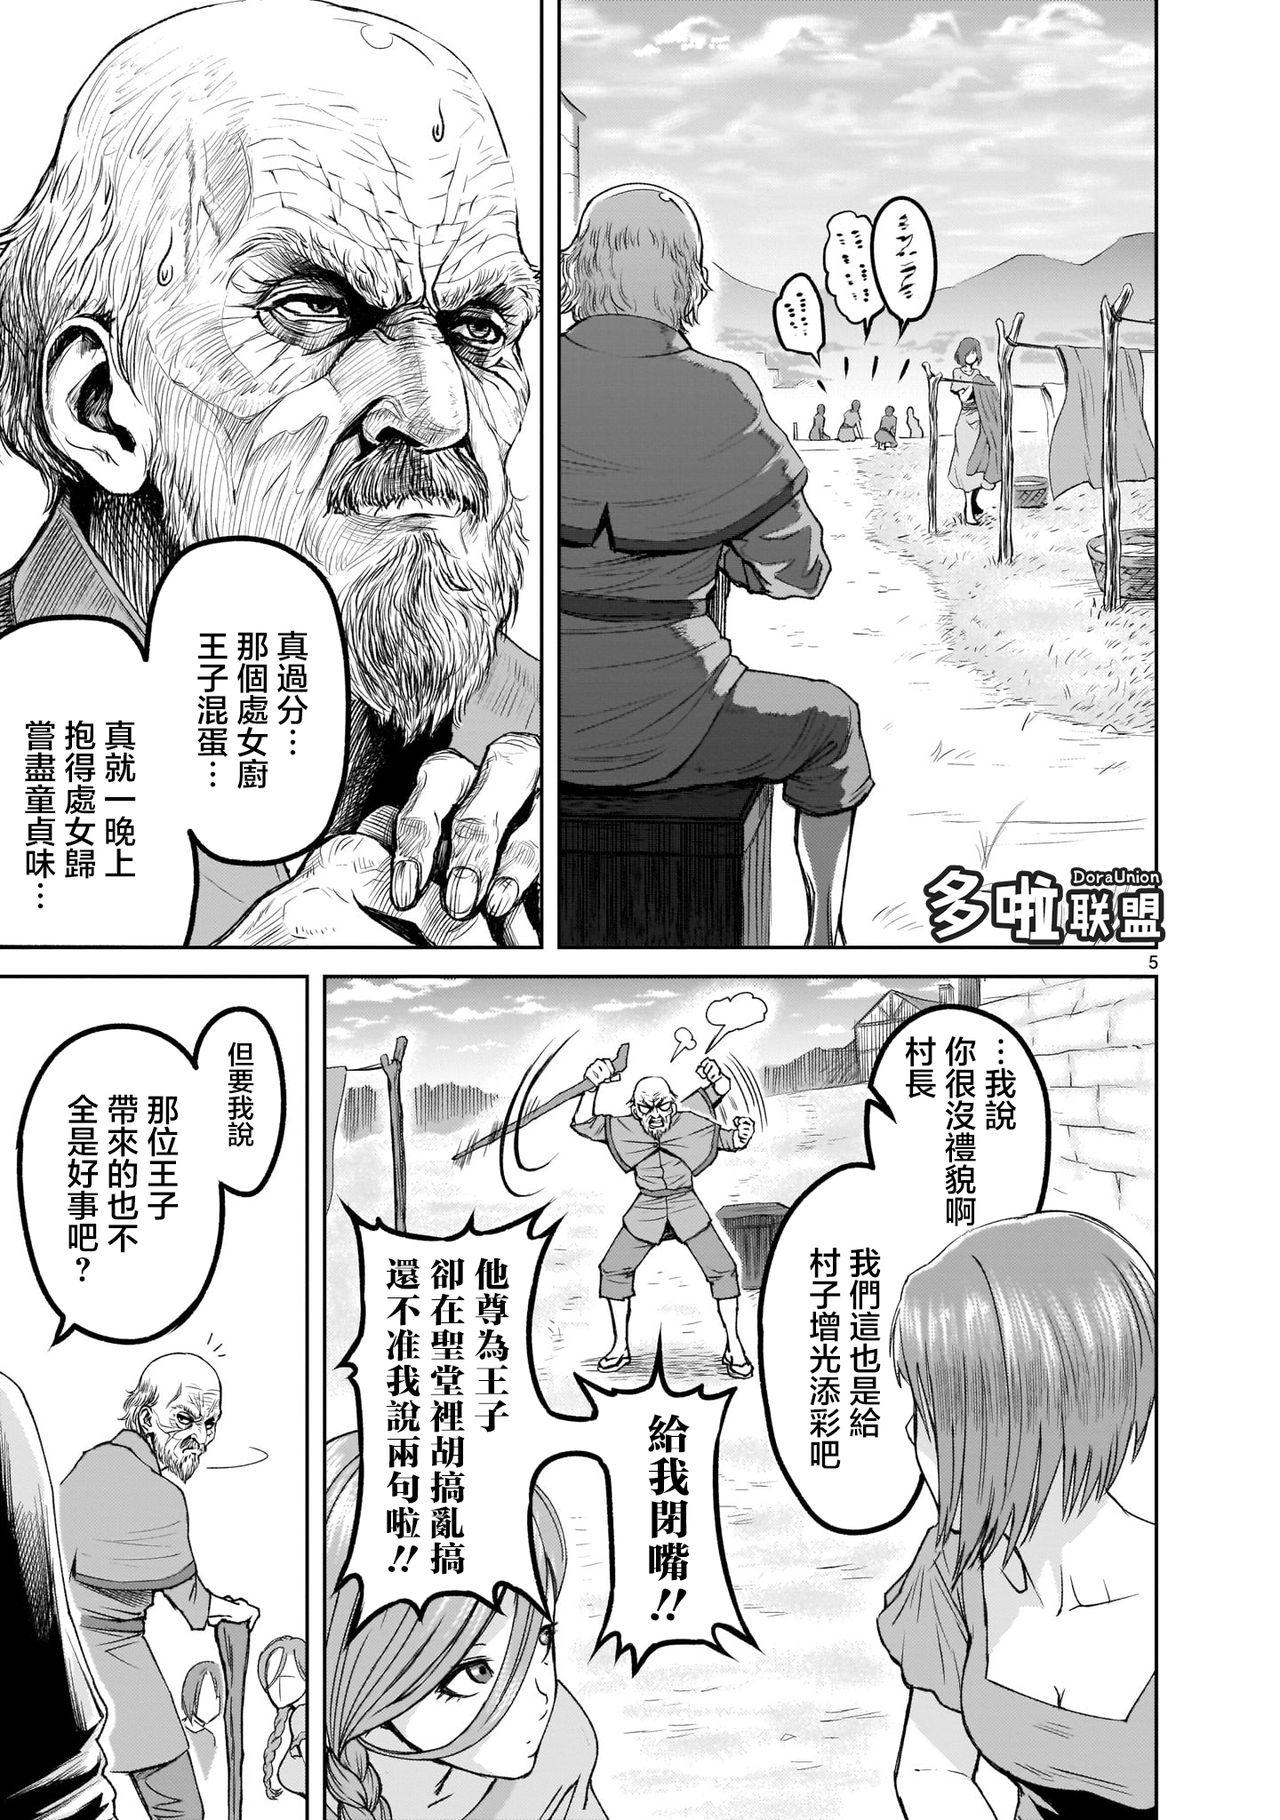 Pigtails 蔷薇园传奇 01-08 Chinese Vadia - Page 6